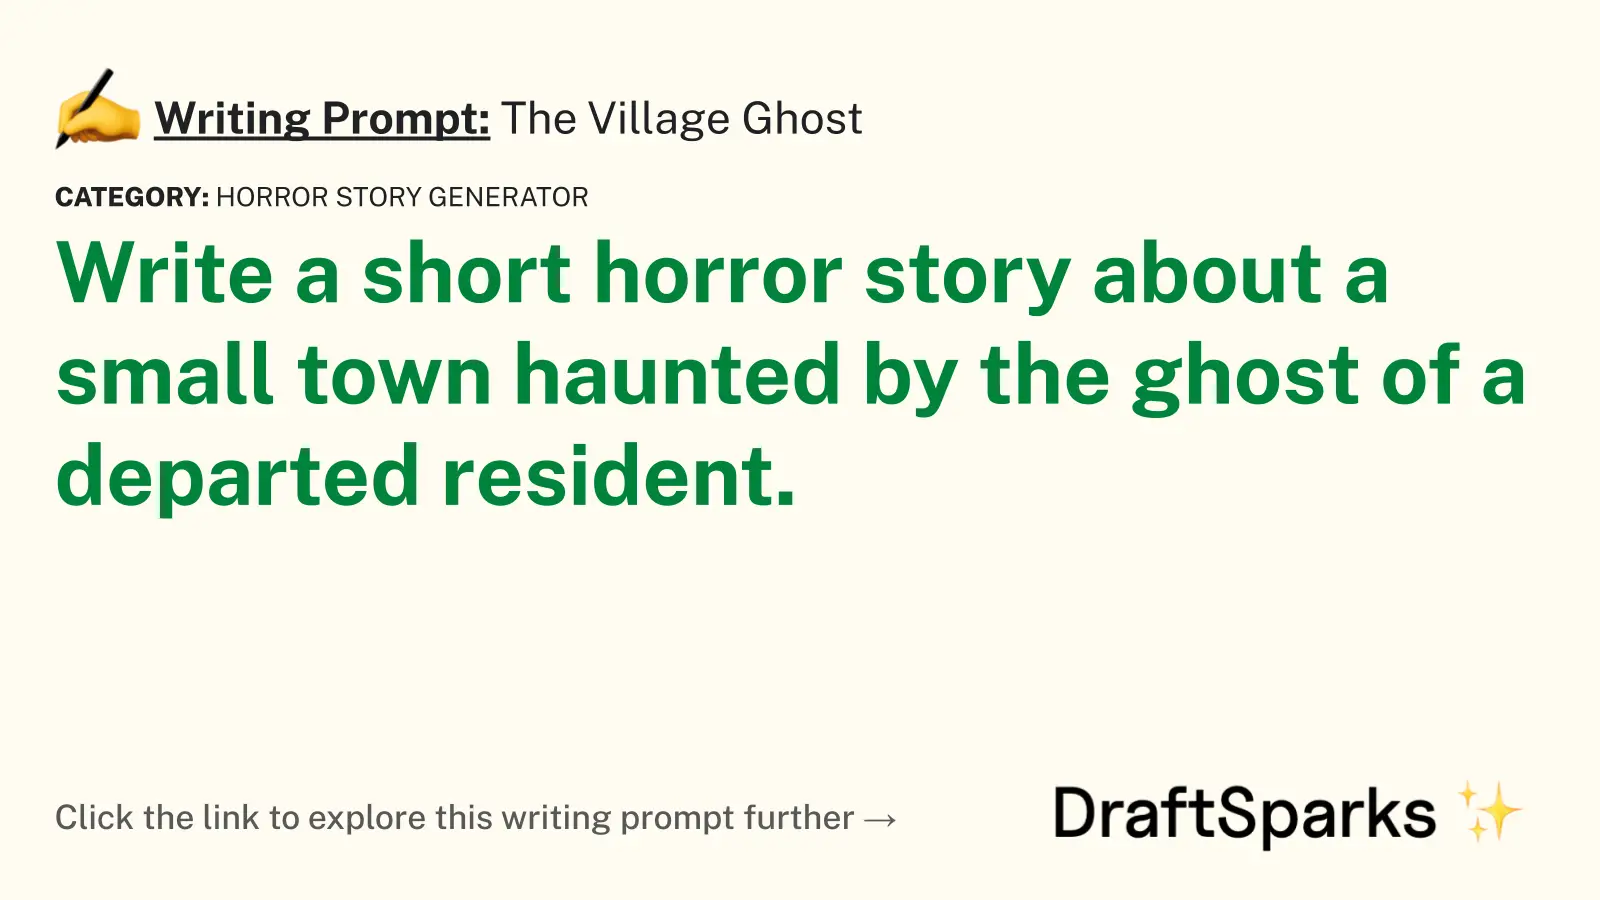 The Village Ghost